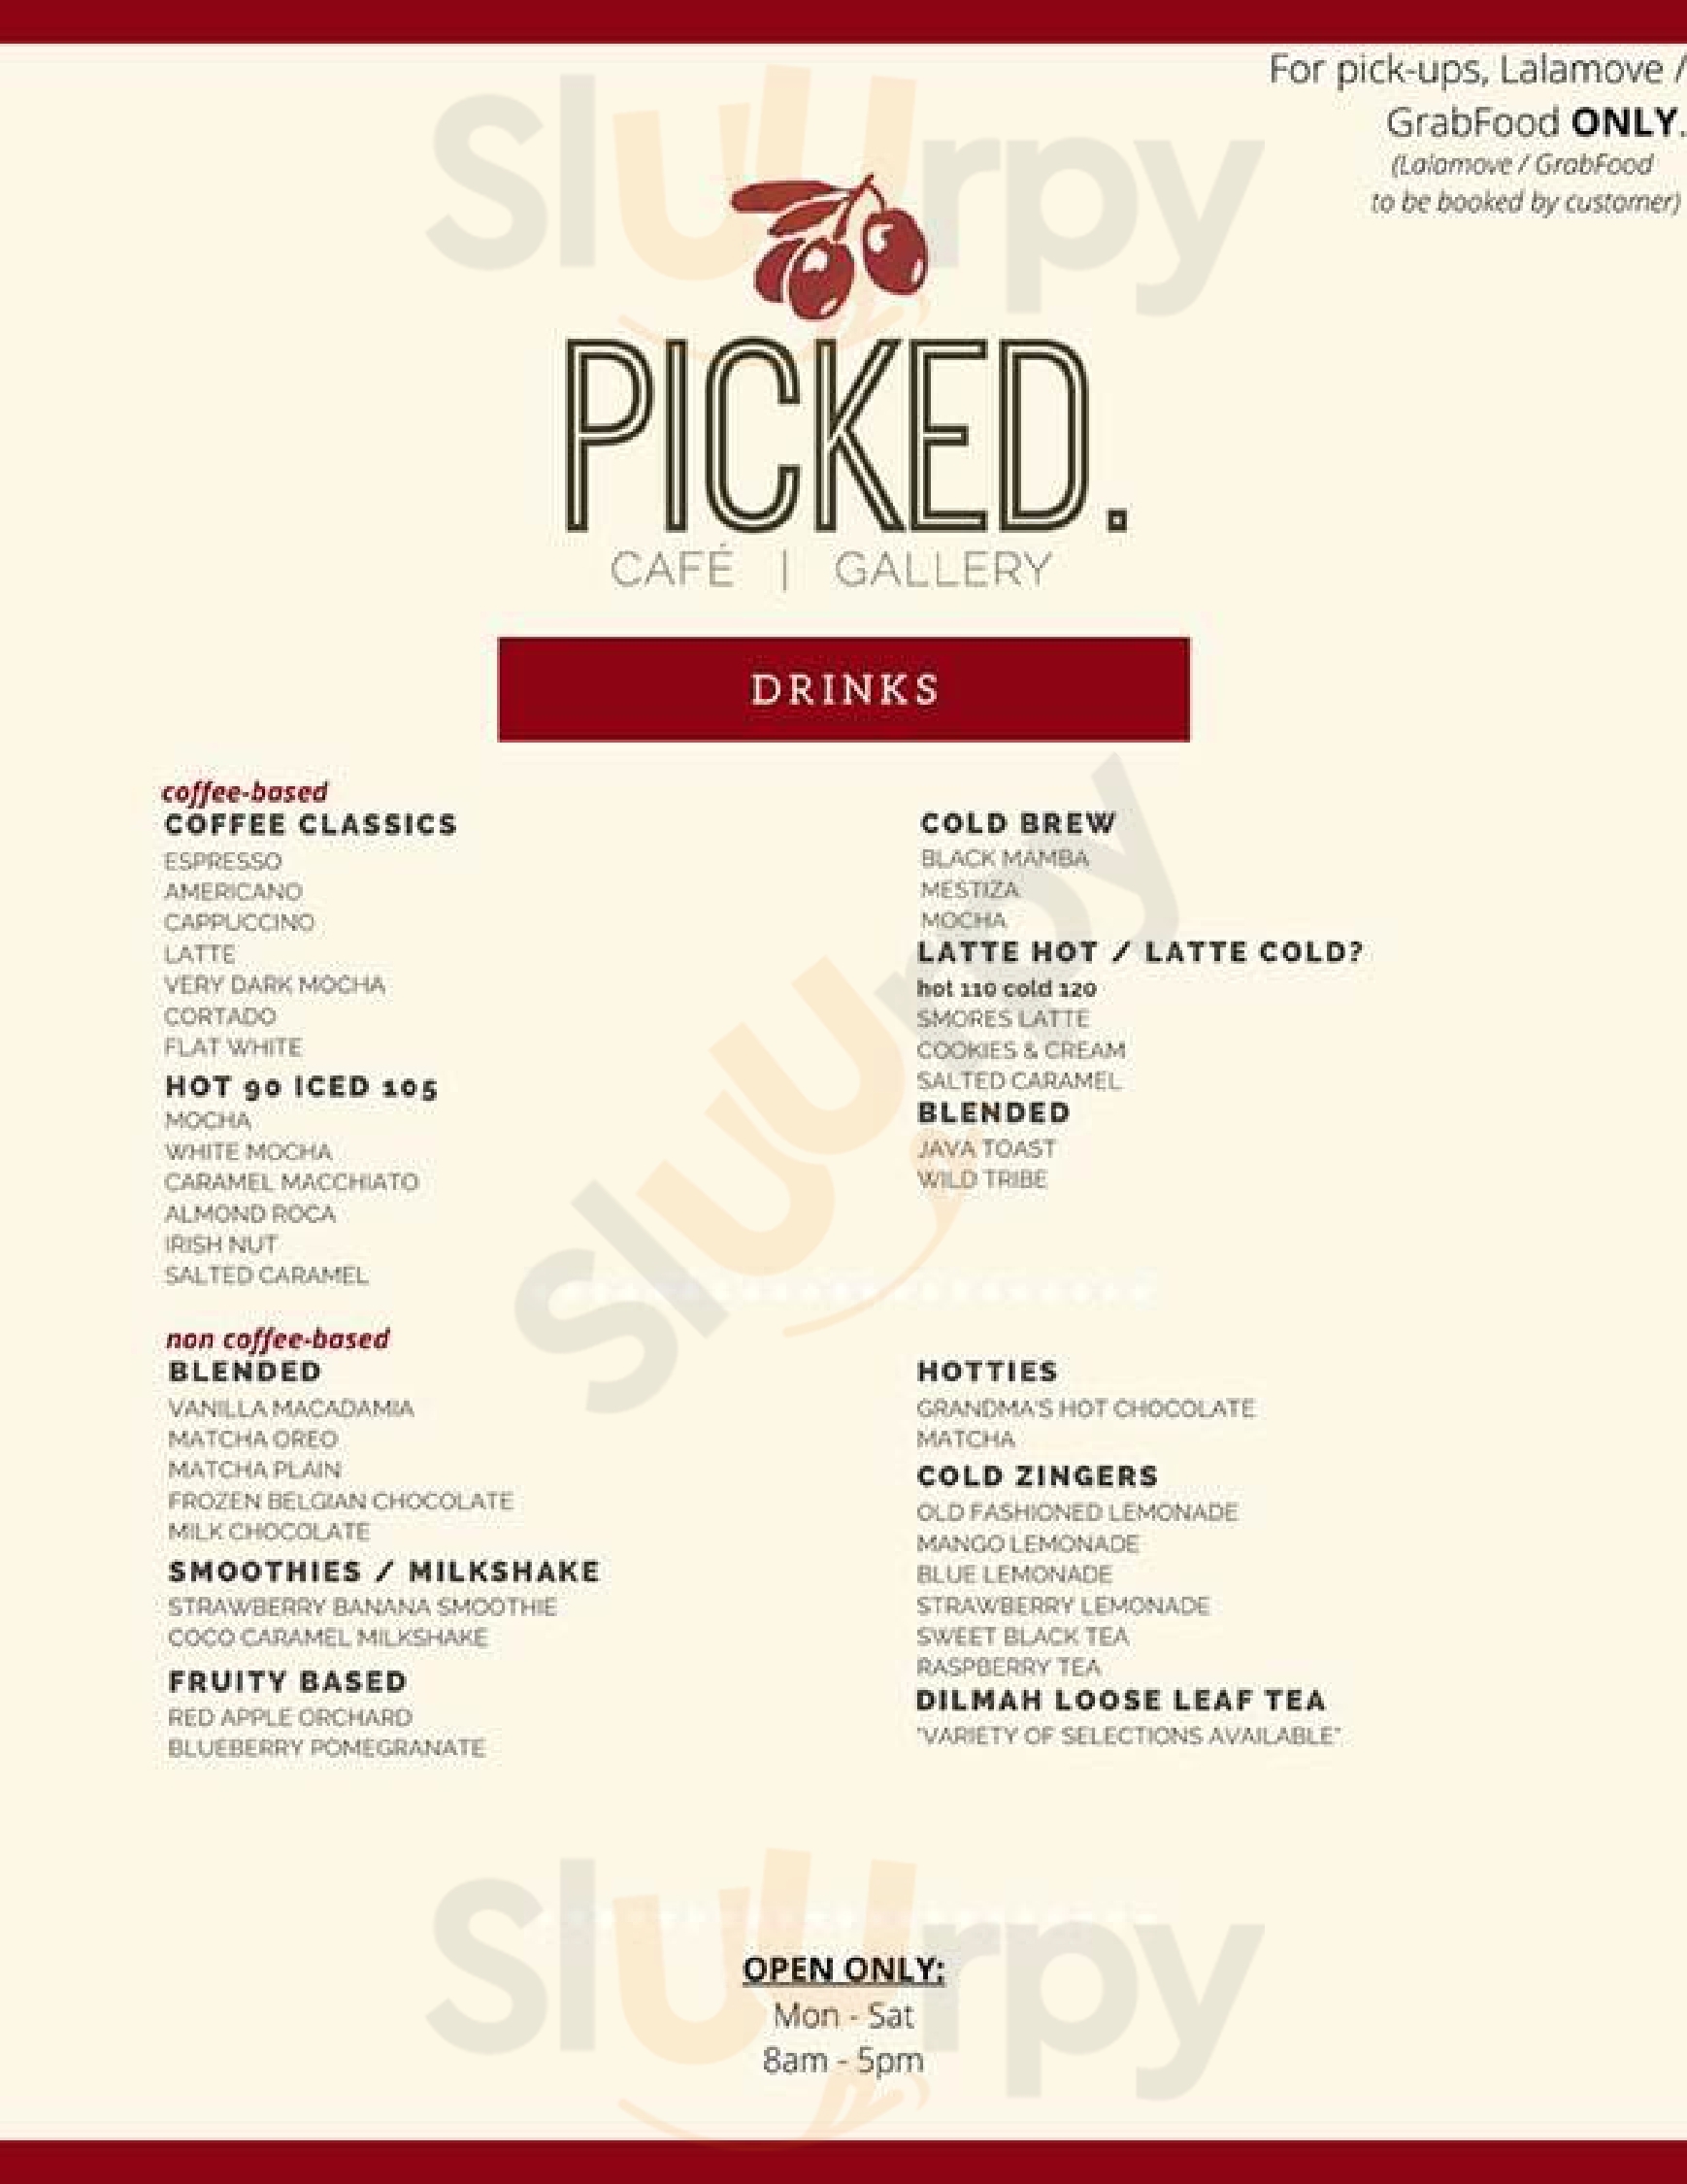 Picked Cafe And Gallery Muntinlupa Menu - 1